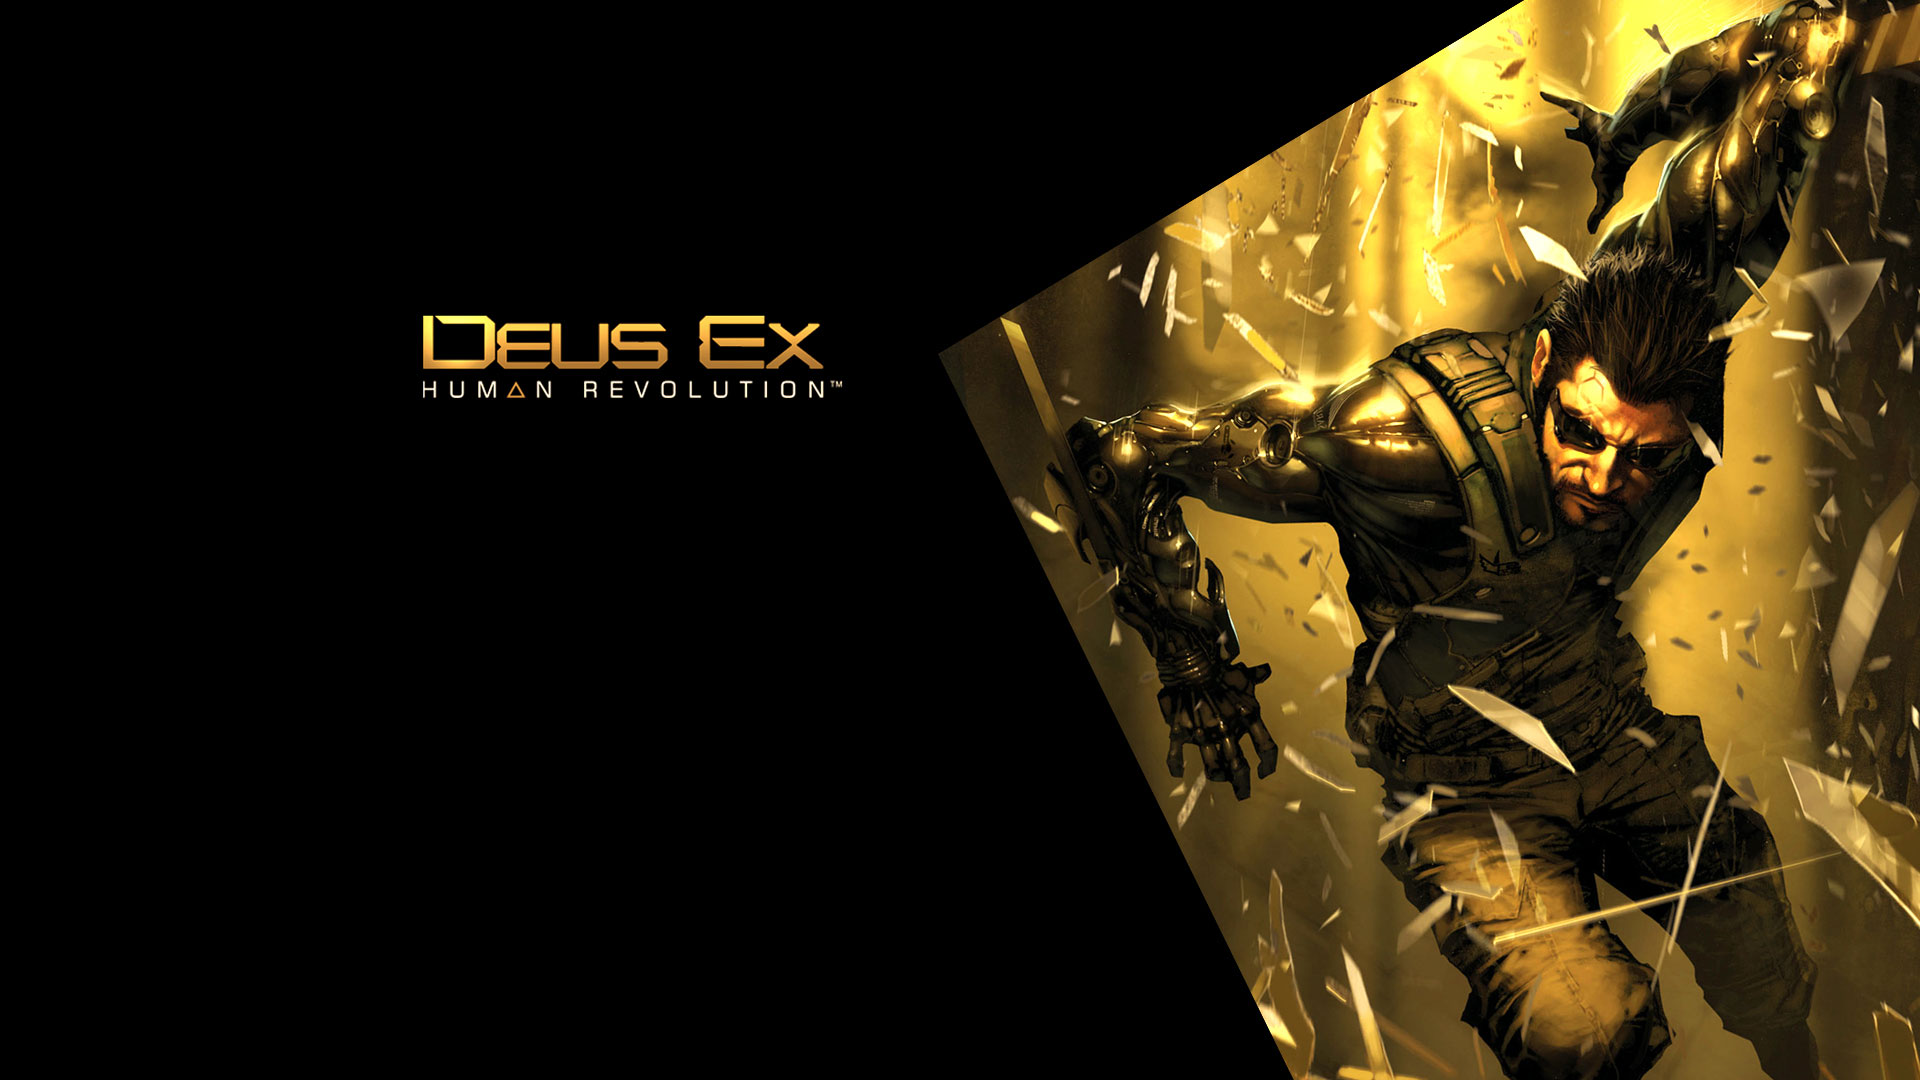 Deus Ex Human Revolution Wallpapers in HD Page 4